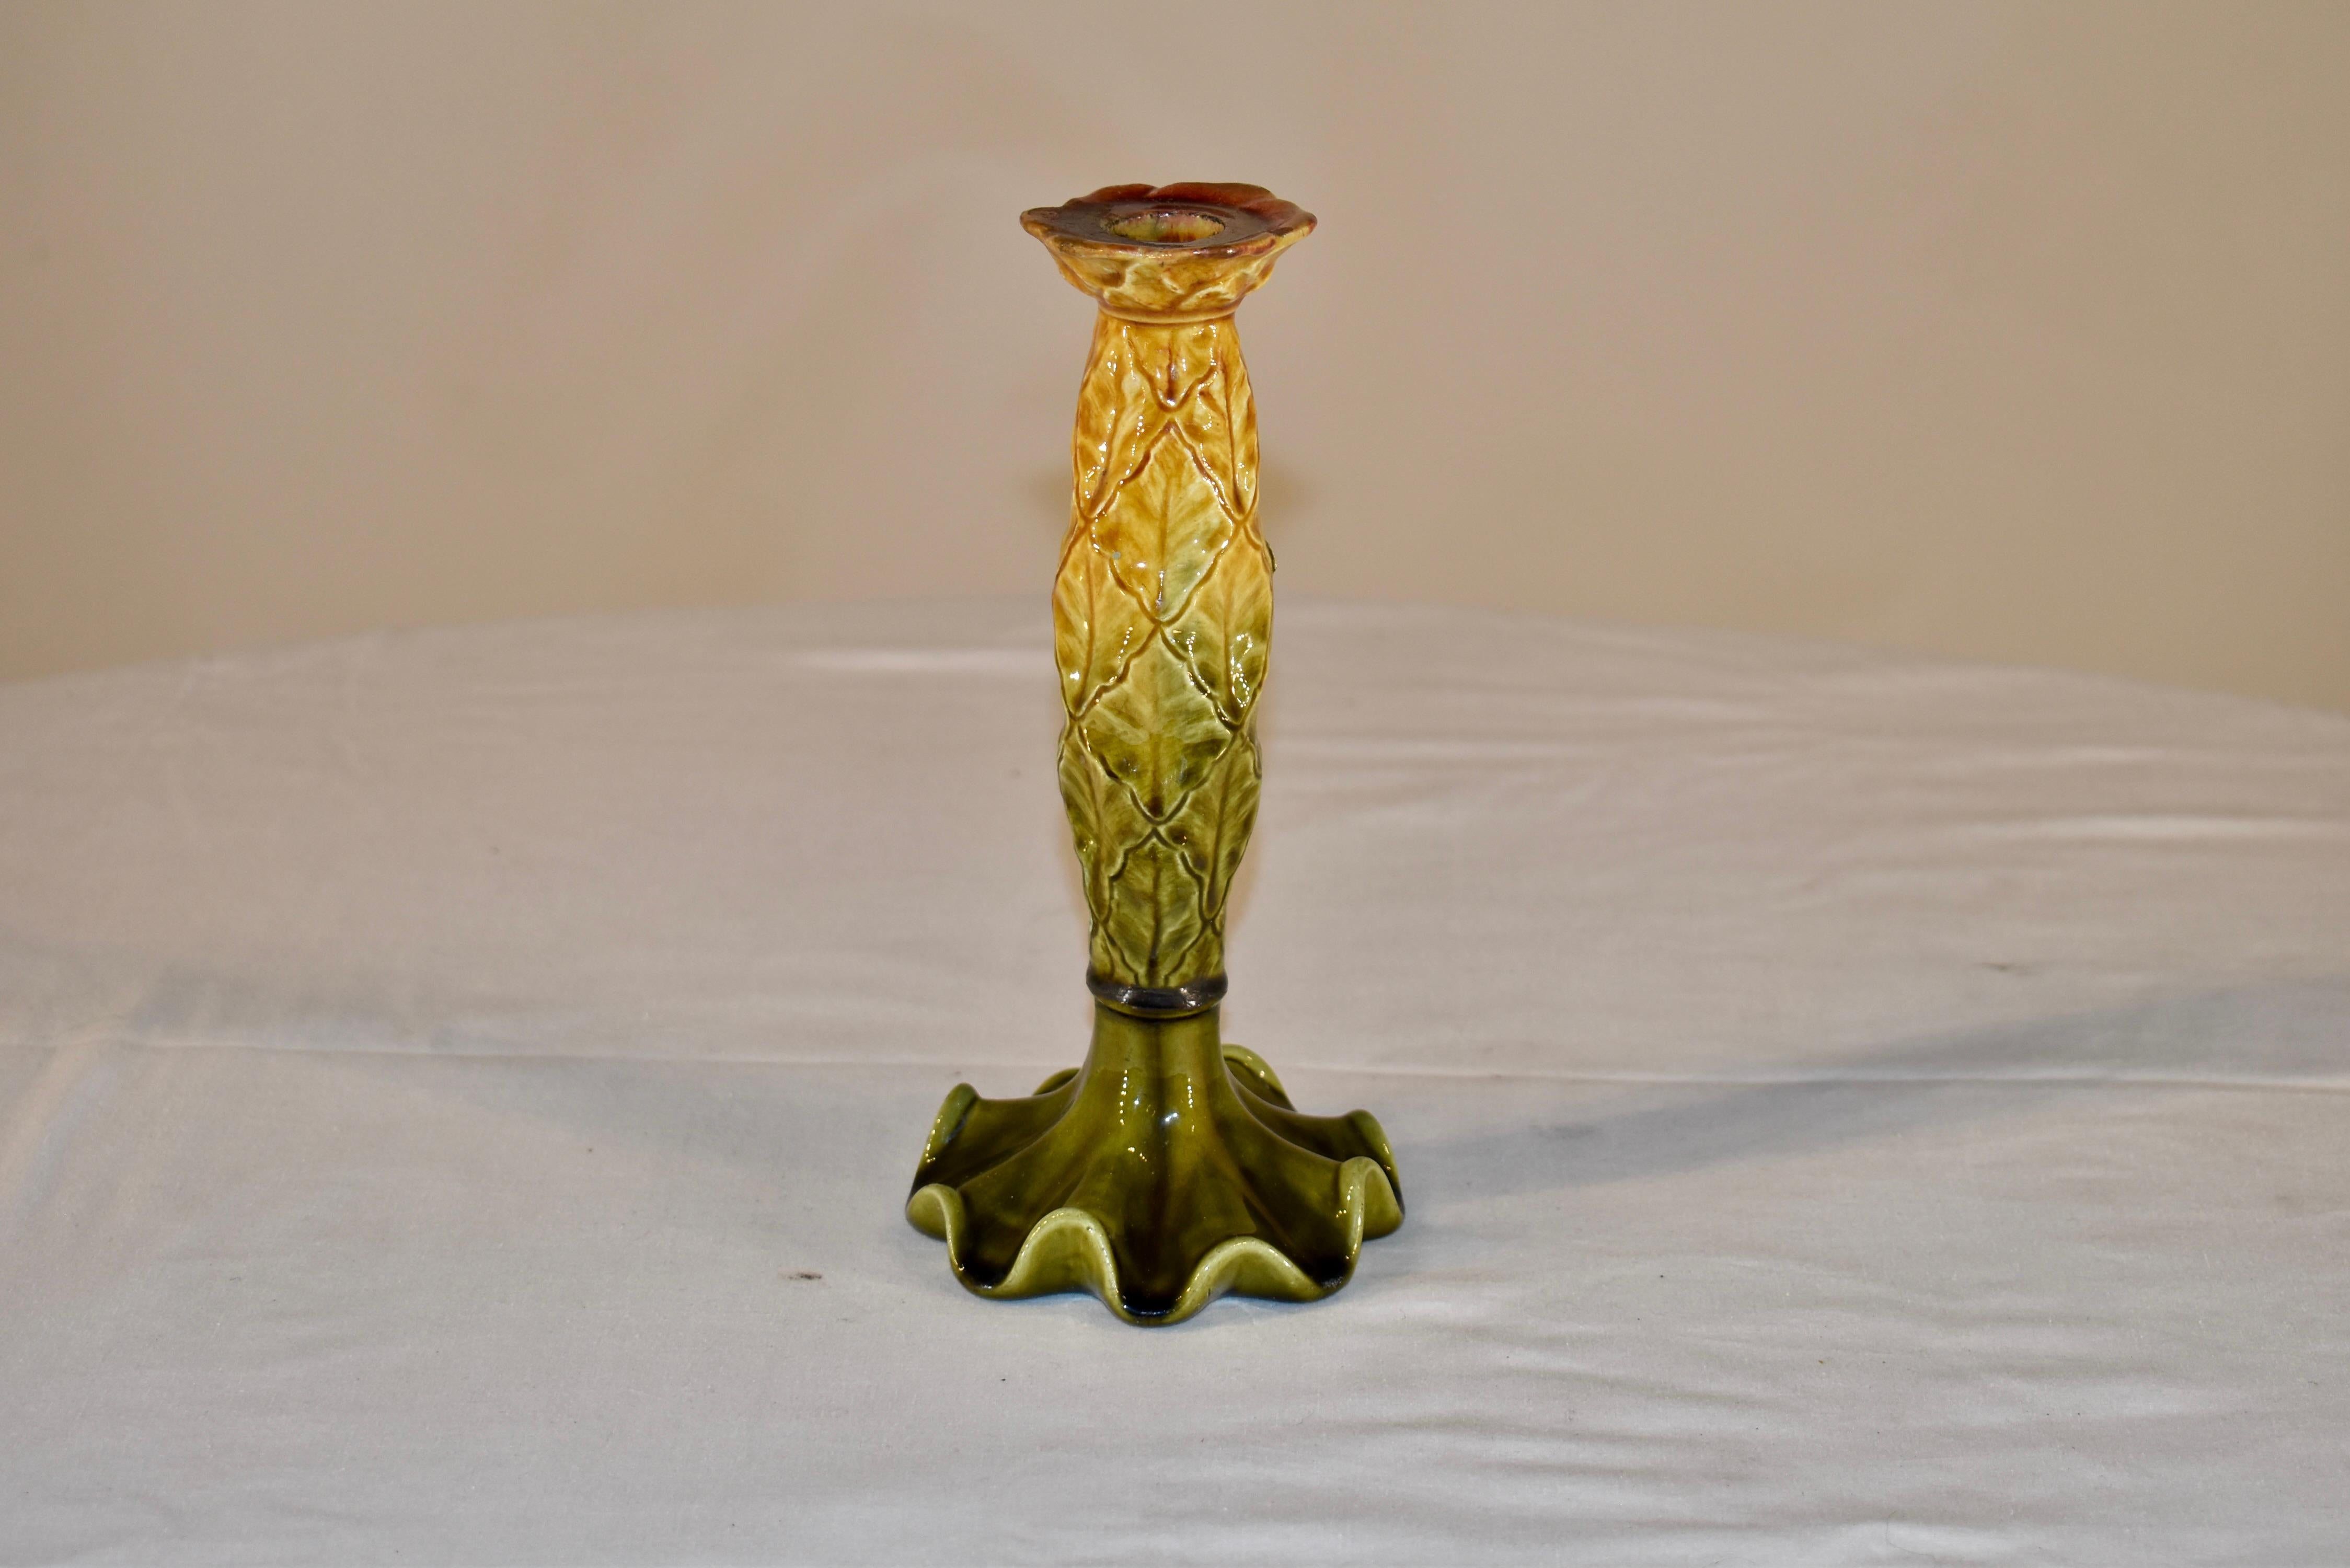 19th century majolica candlestick in a lovely pineapple design.  The colors are wonderfully rich and what an unusual piece to add to any collection!